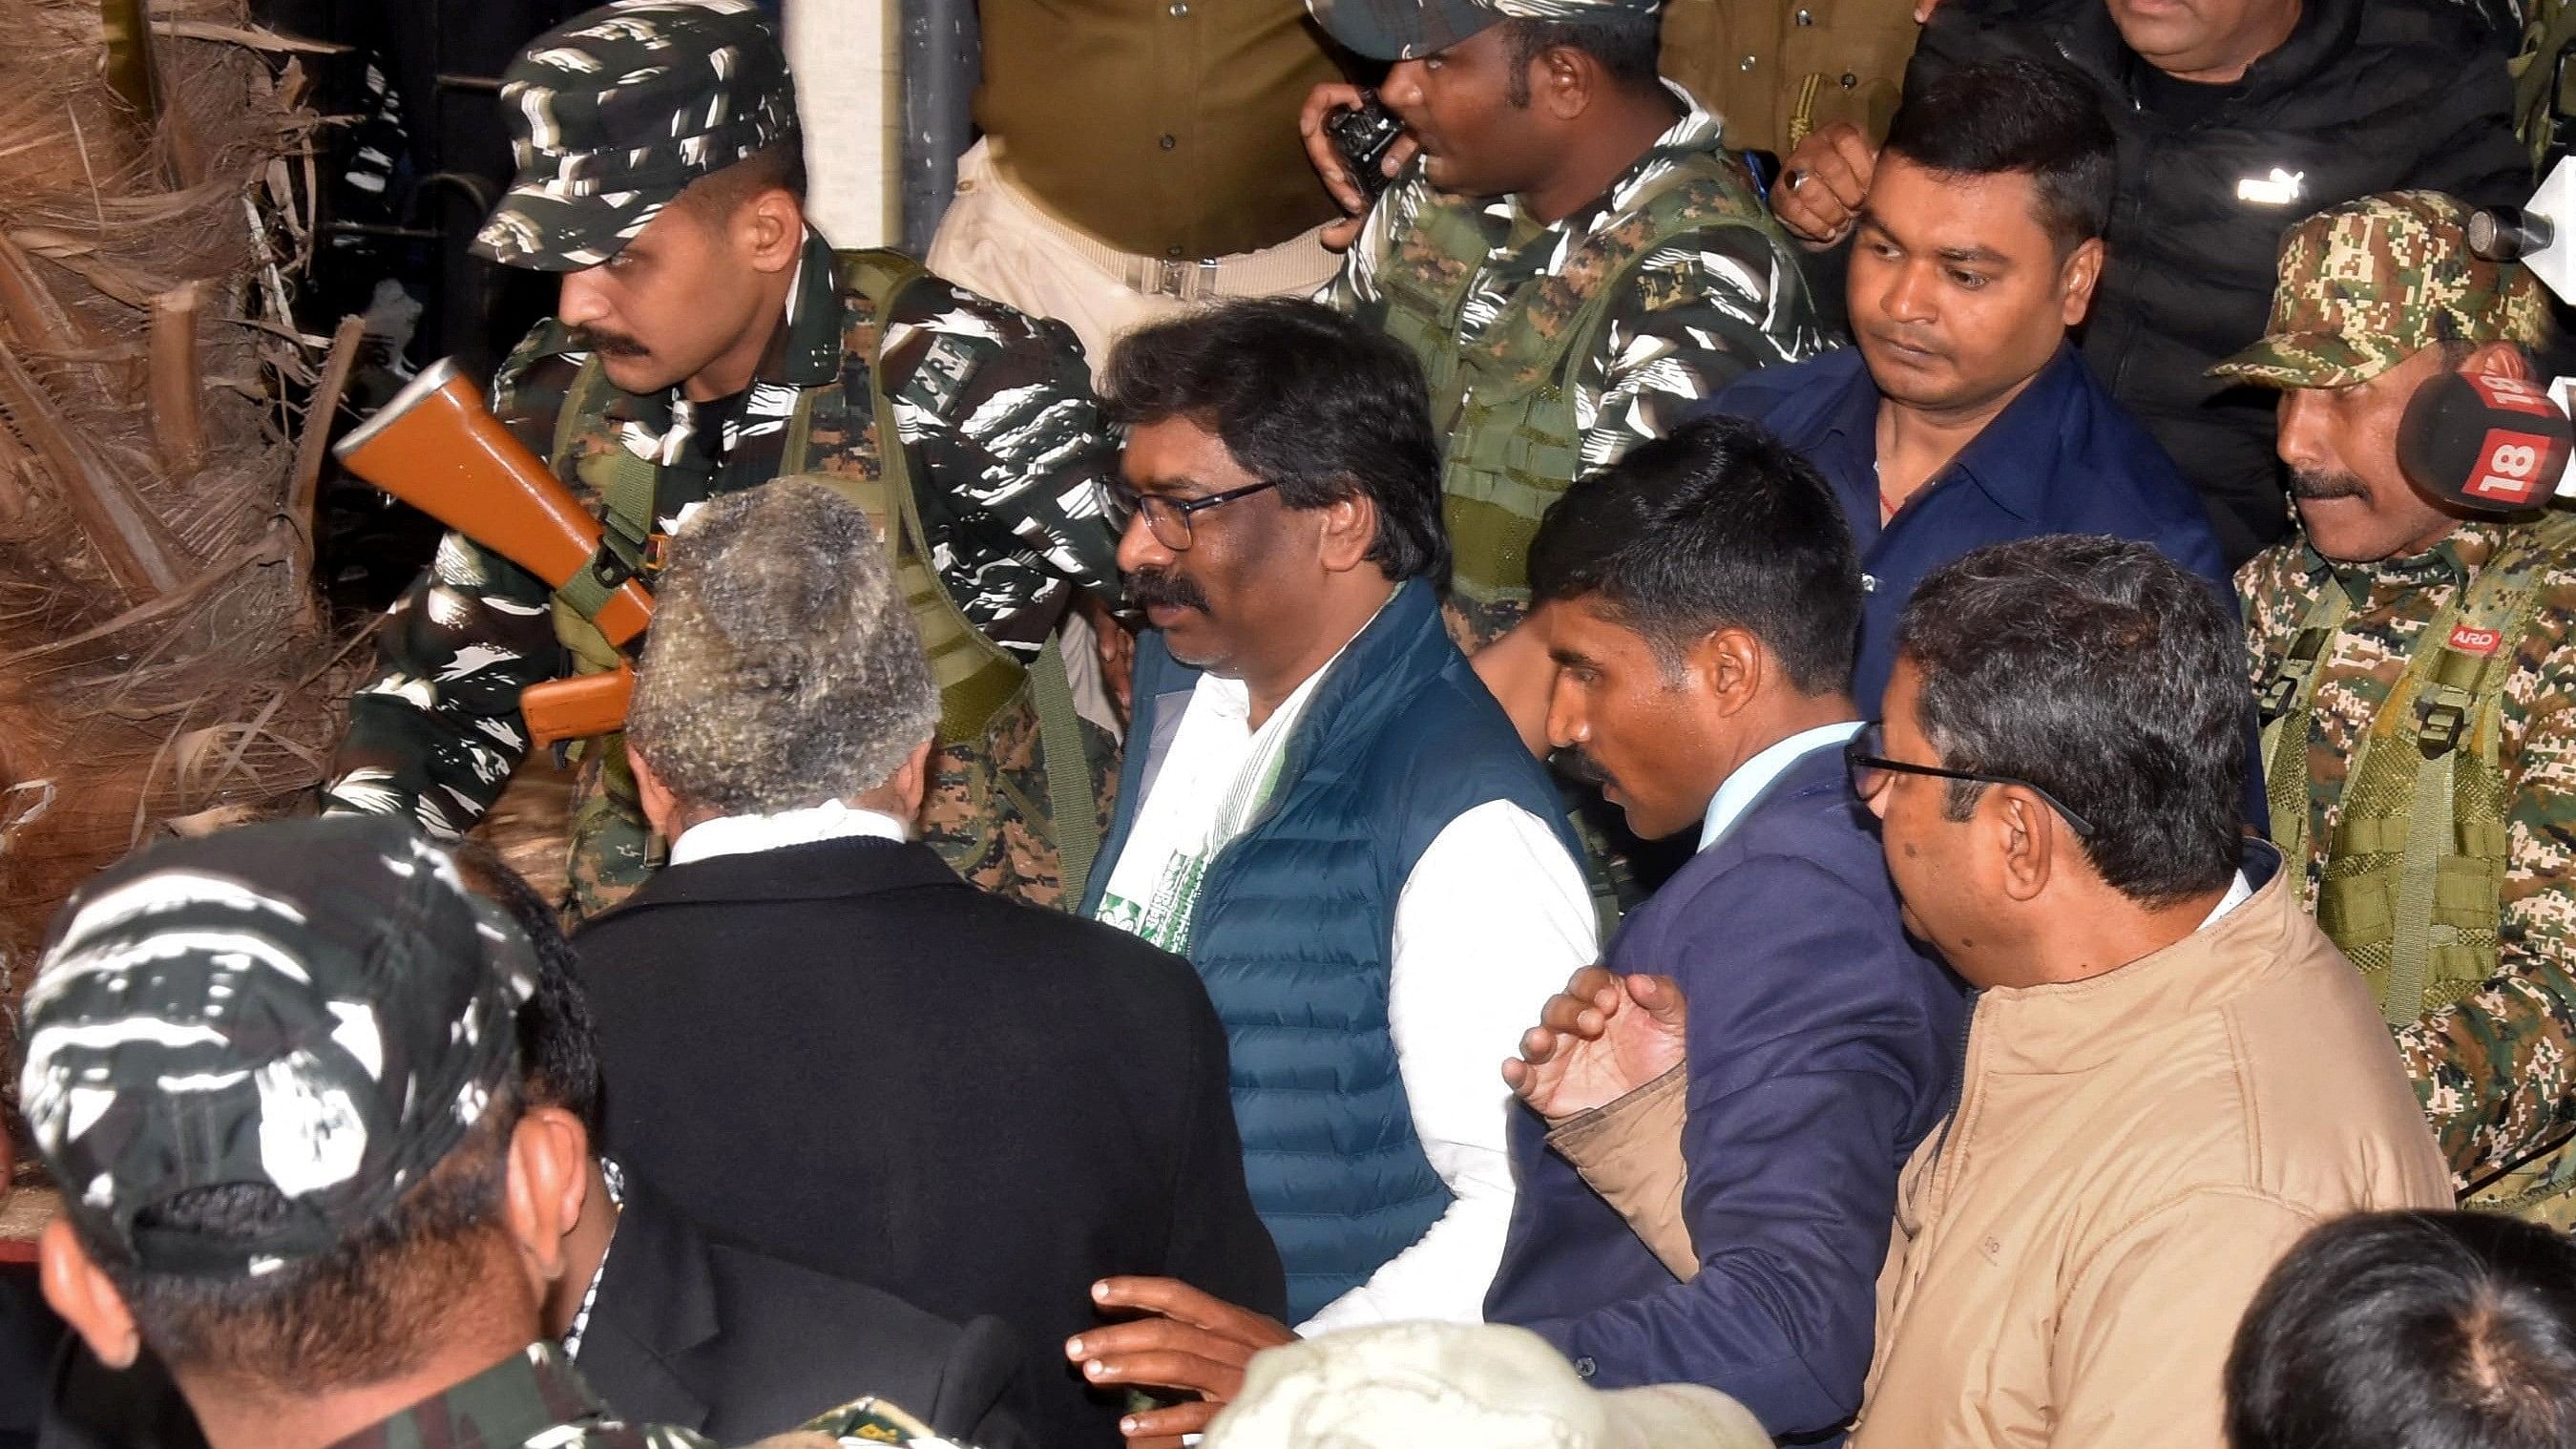 <div class="paragraphs"><p>Hemant Soren, former chief minister of  Jharkhand, is escorted by security personnel as he leaves court following his arrest late Wednesday.</p></div>